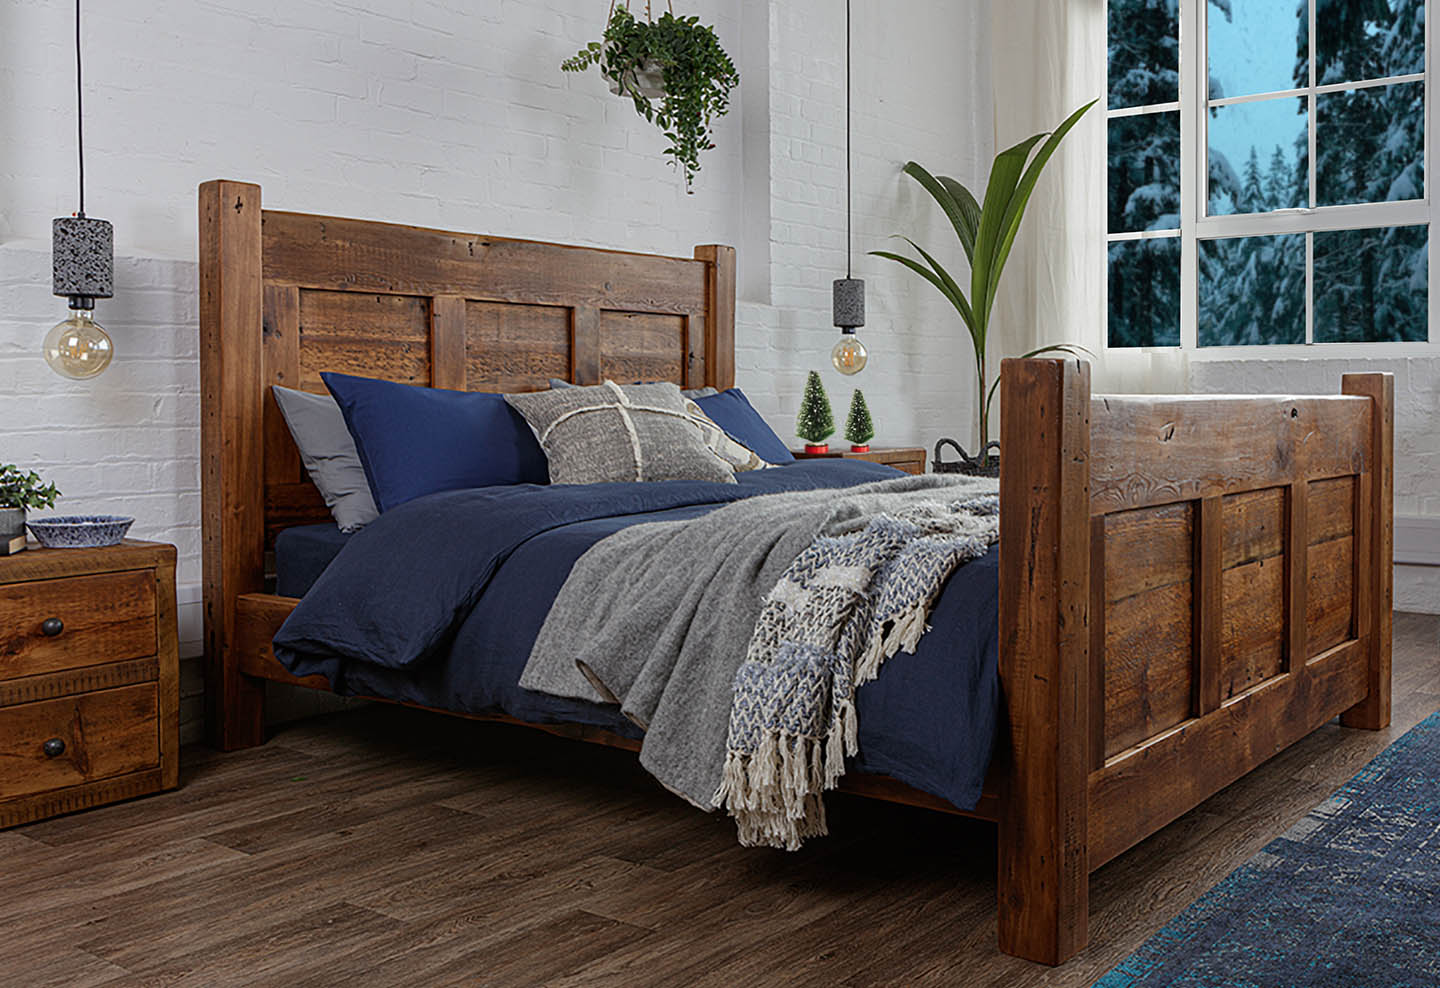 reclaimed wooden bed frame with blue covers and small Christmas trees on bedside table